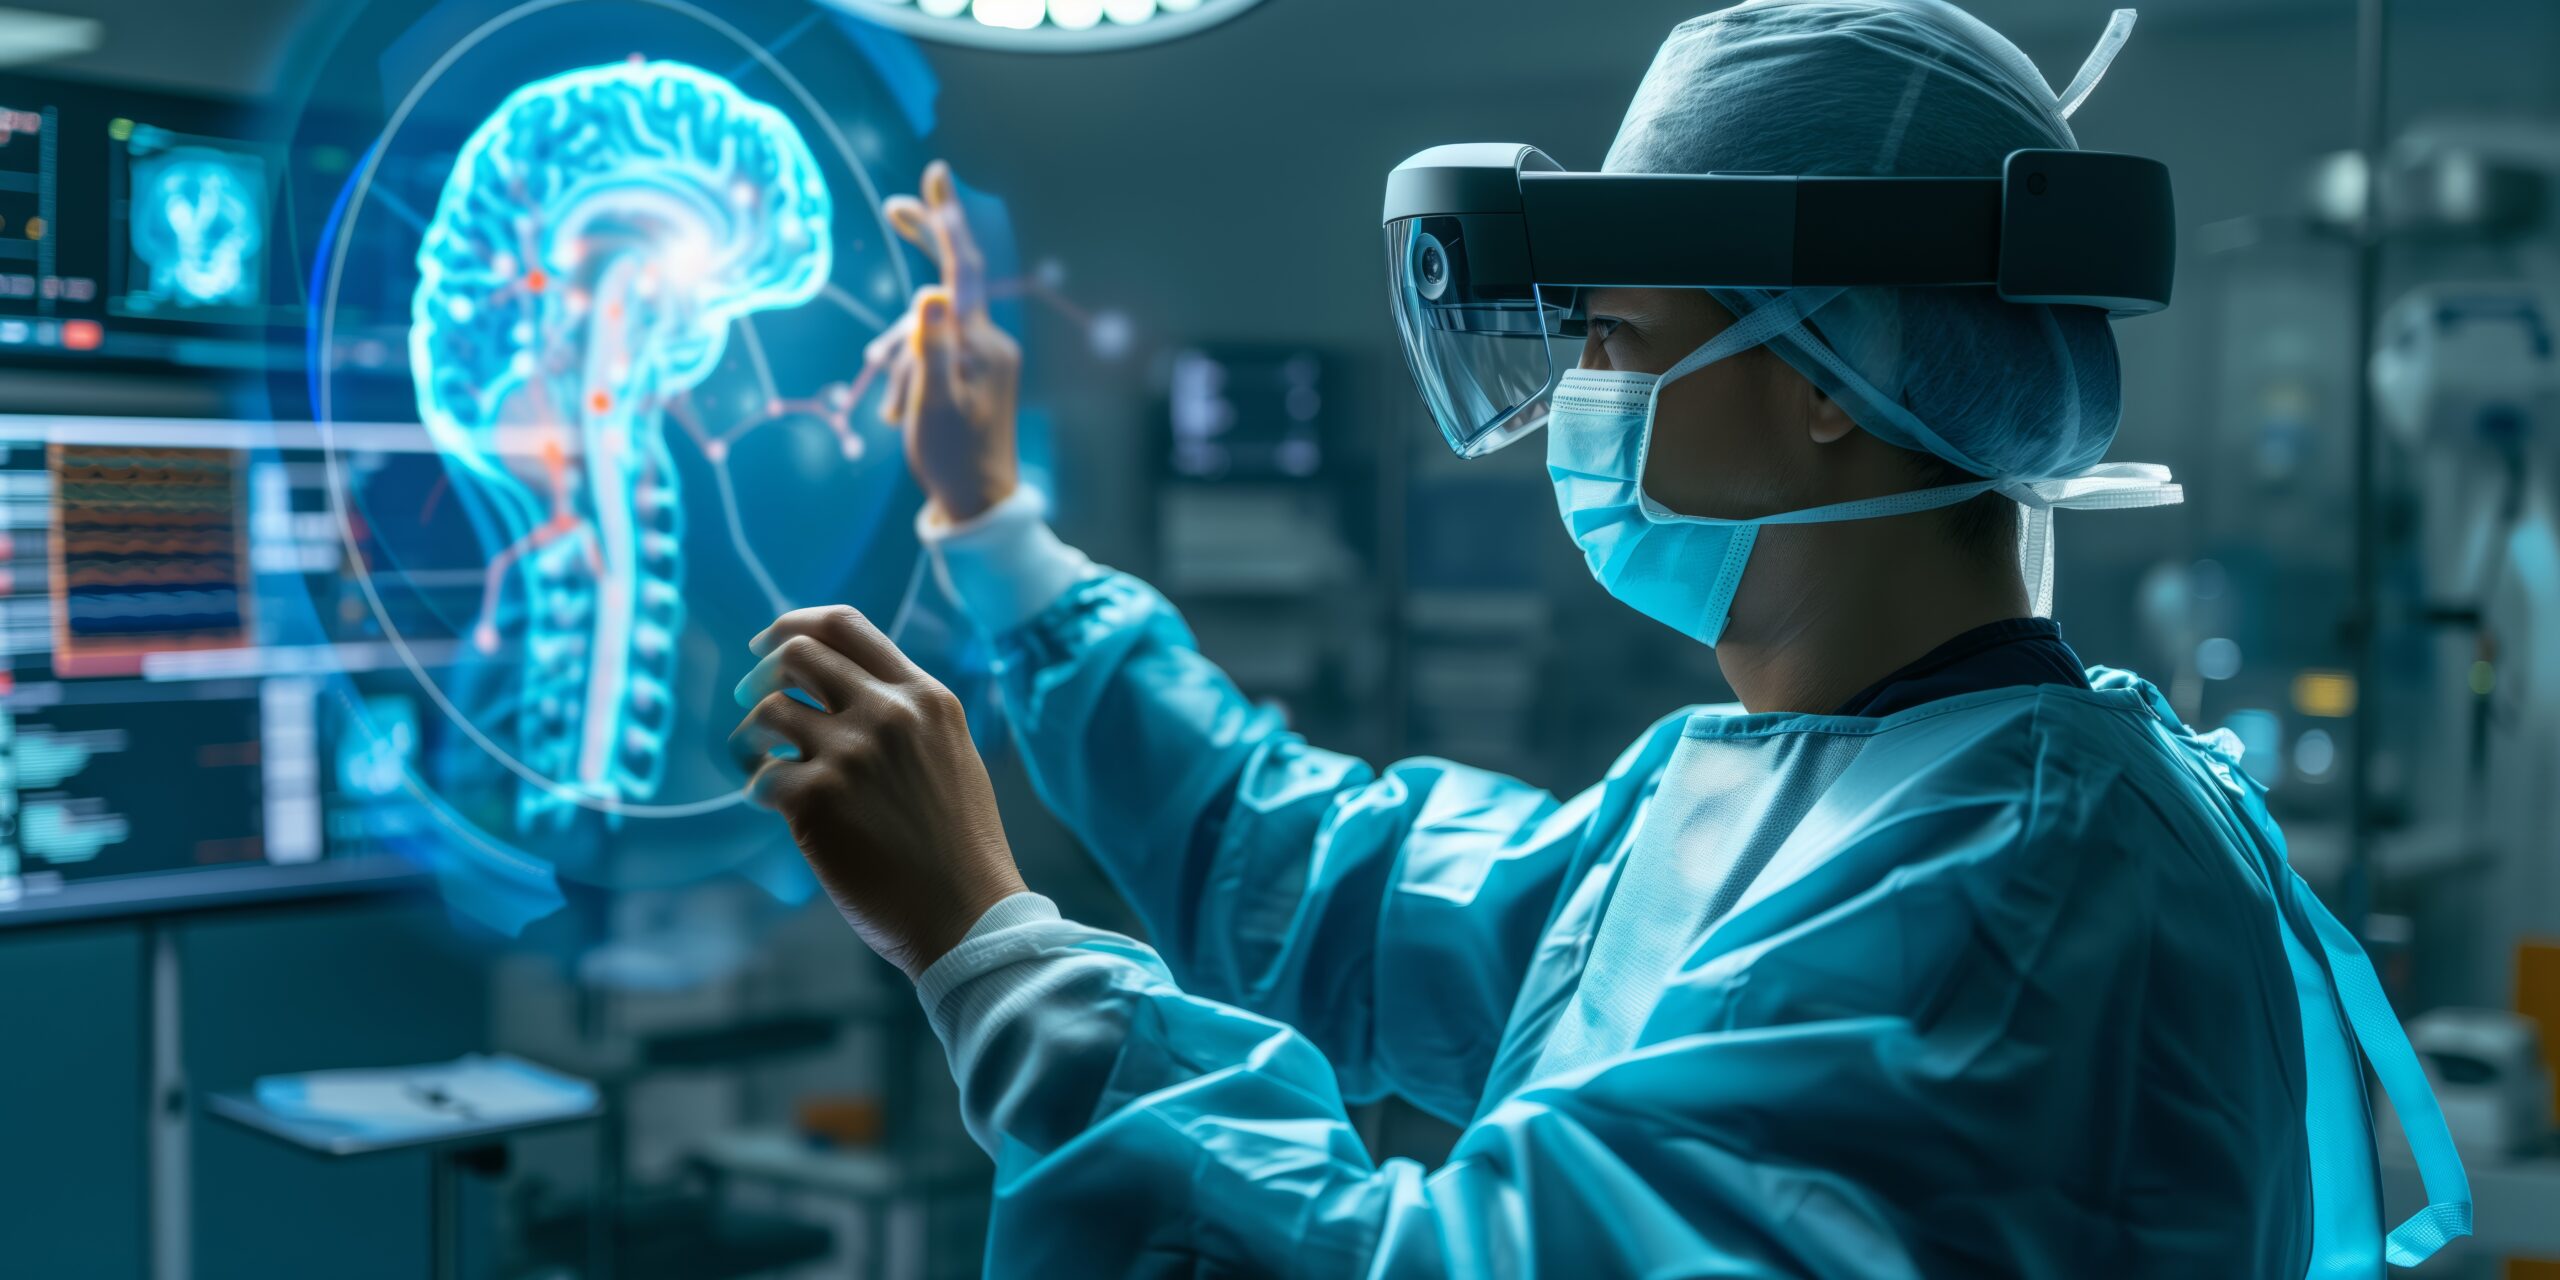 A medical professional in a surgical gown uses a VR headset to interact with a 3D brain rendering in a high-tech operating room, indicating medical education